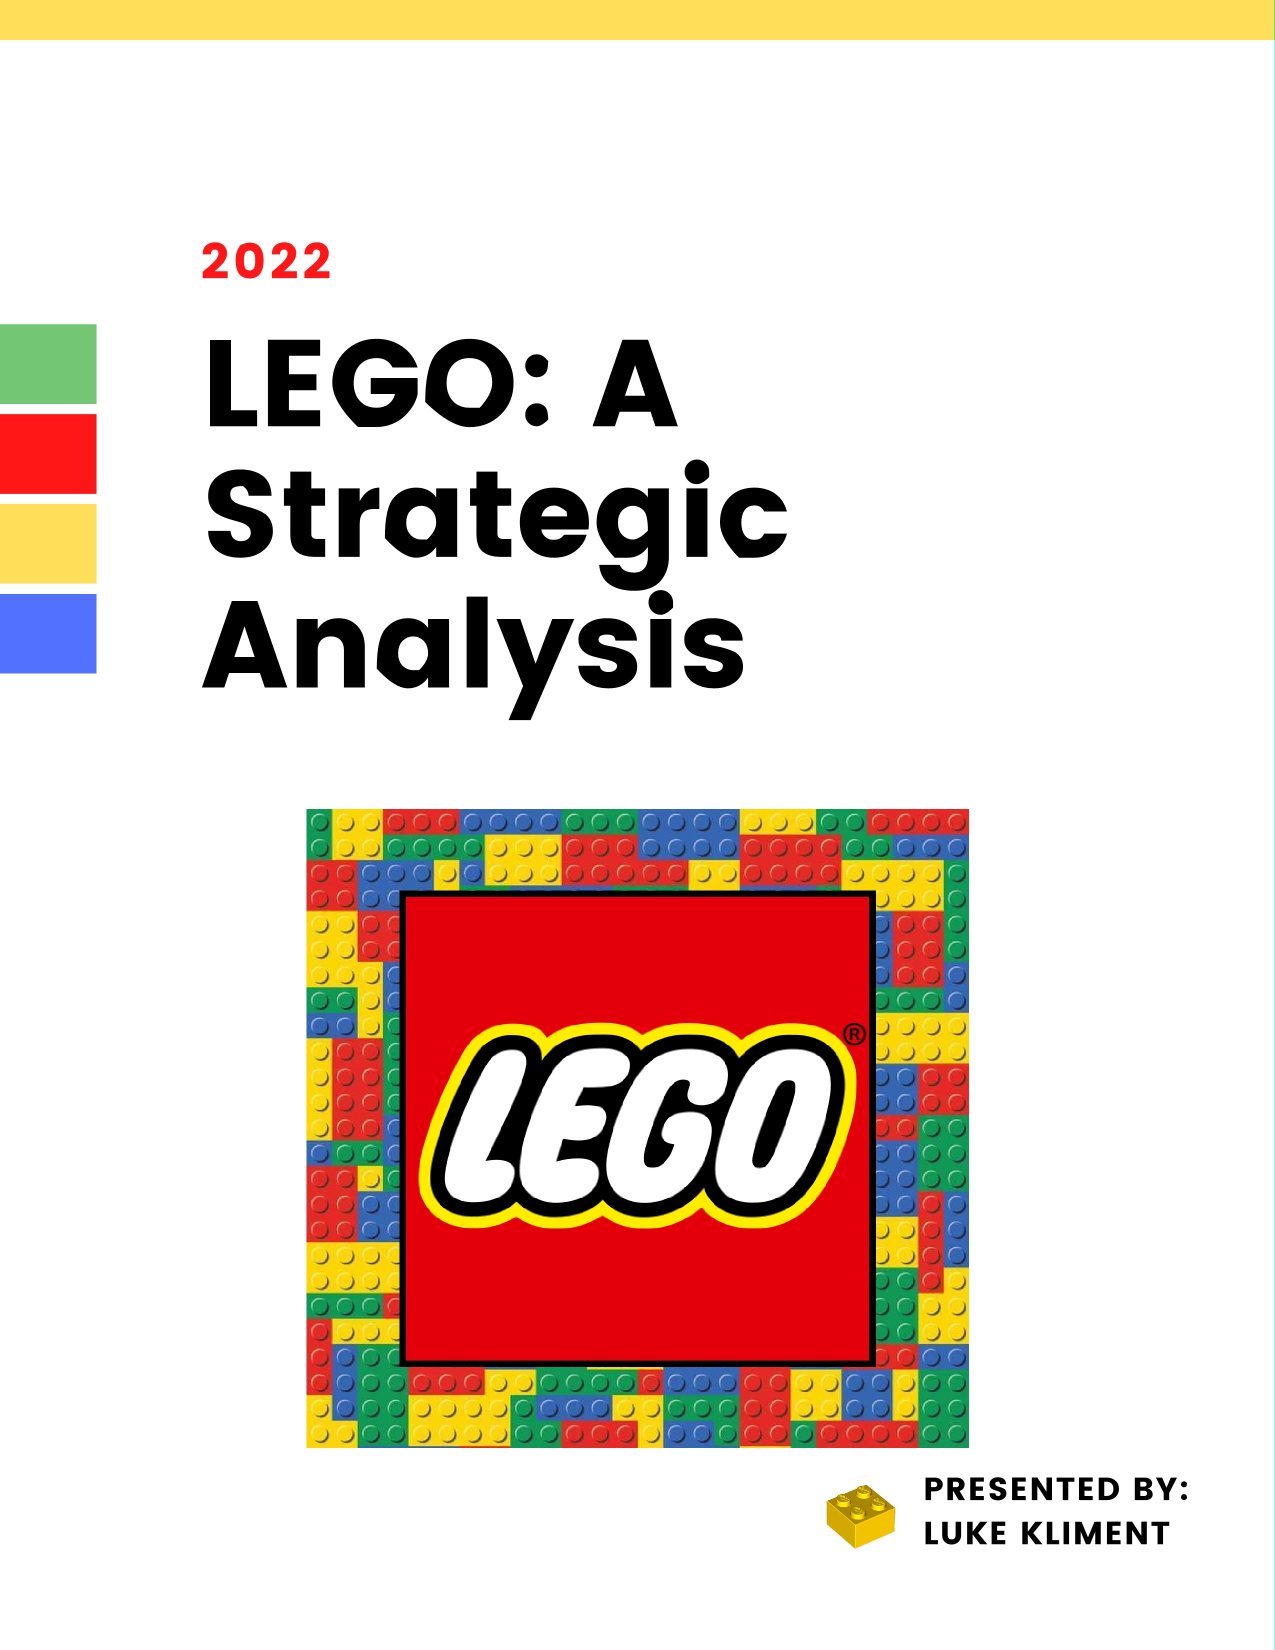 LEGO's new adult product strategy: Why LEGO is retiring Creator